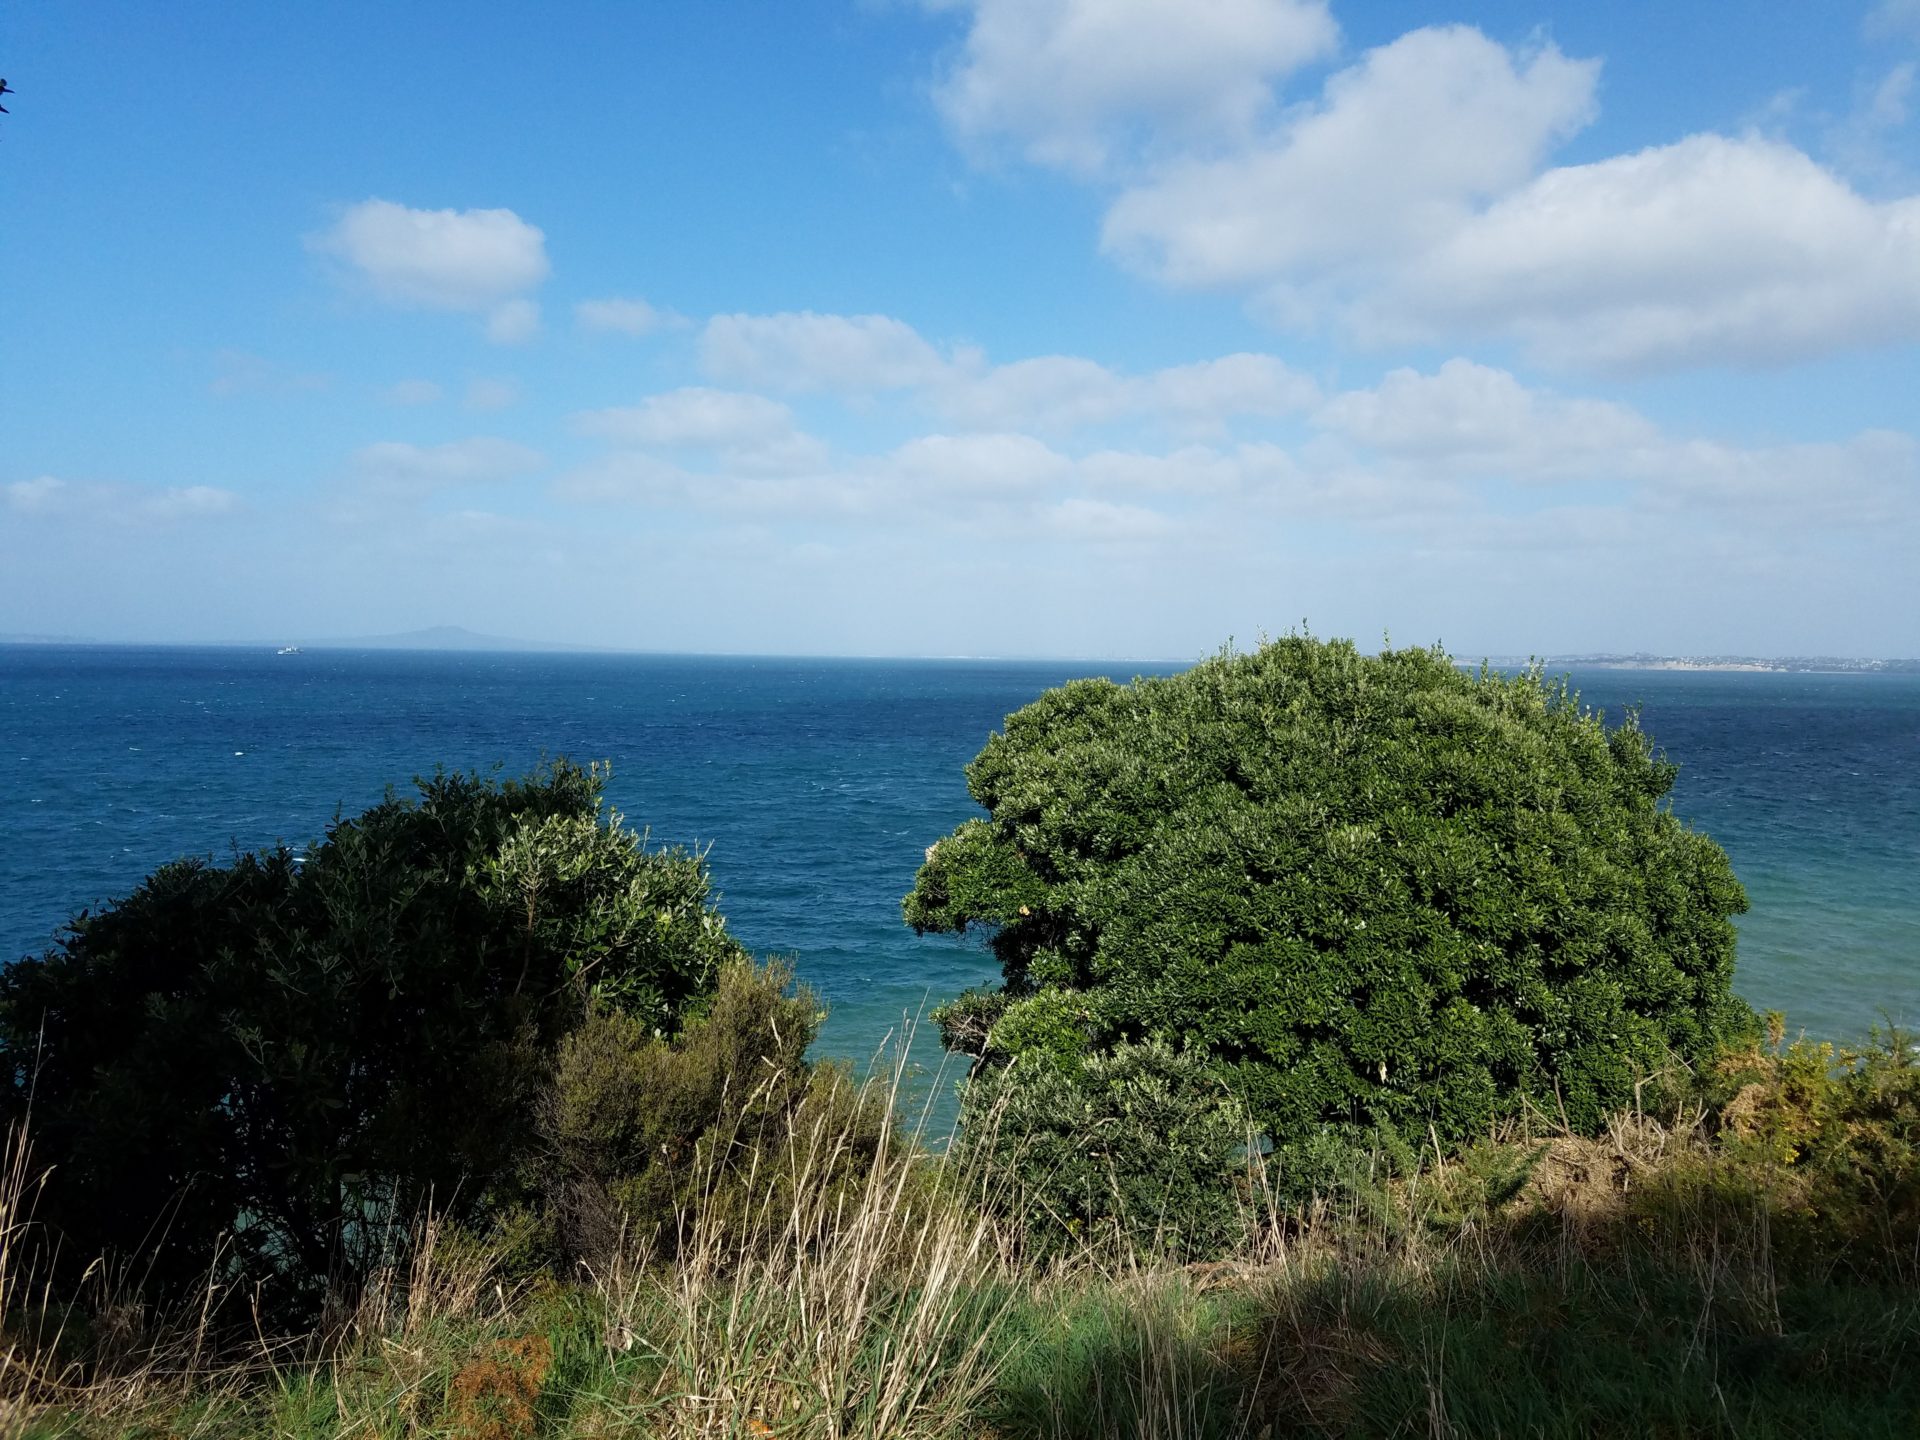 a view of the ocean from a hill with trees and bushes